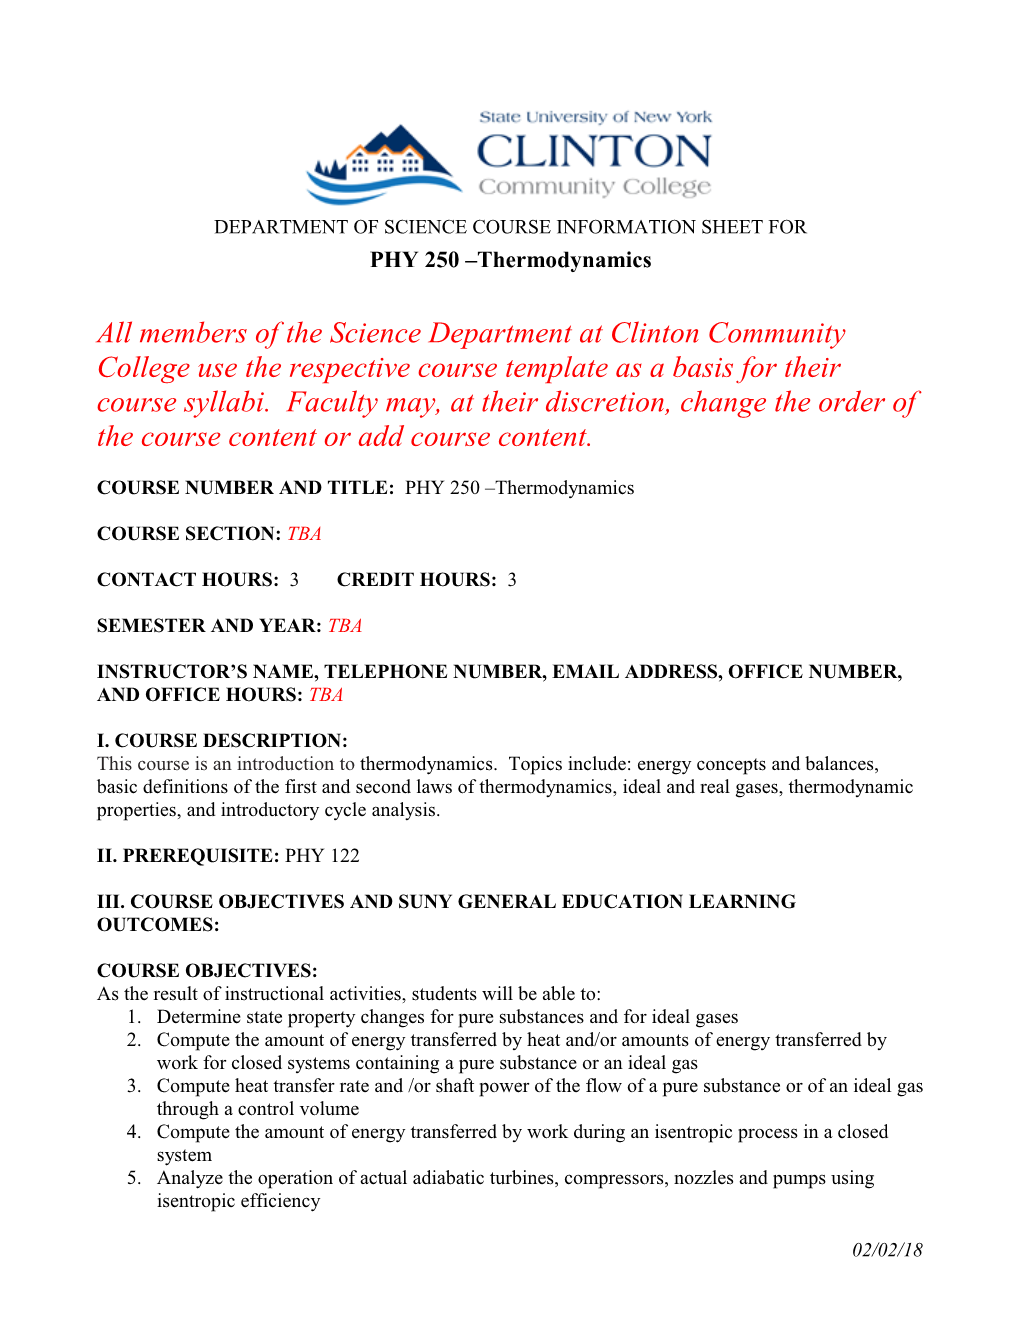 Department of Science Course Information Sheet For